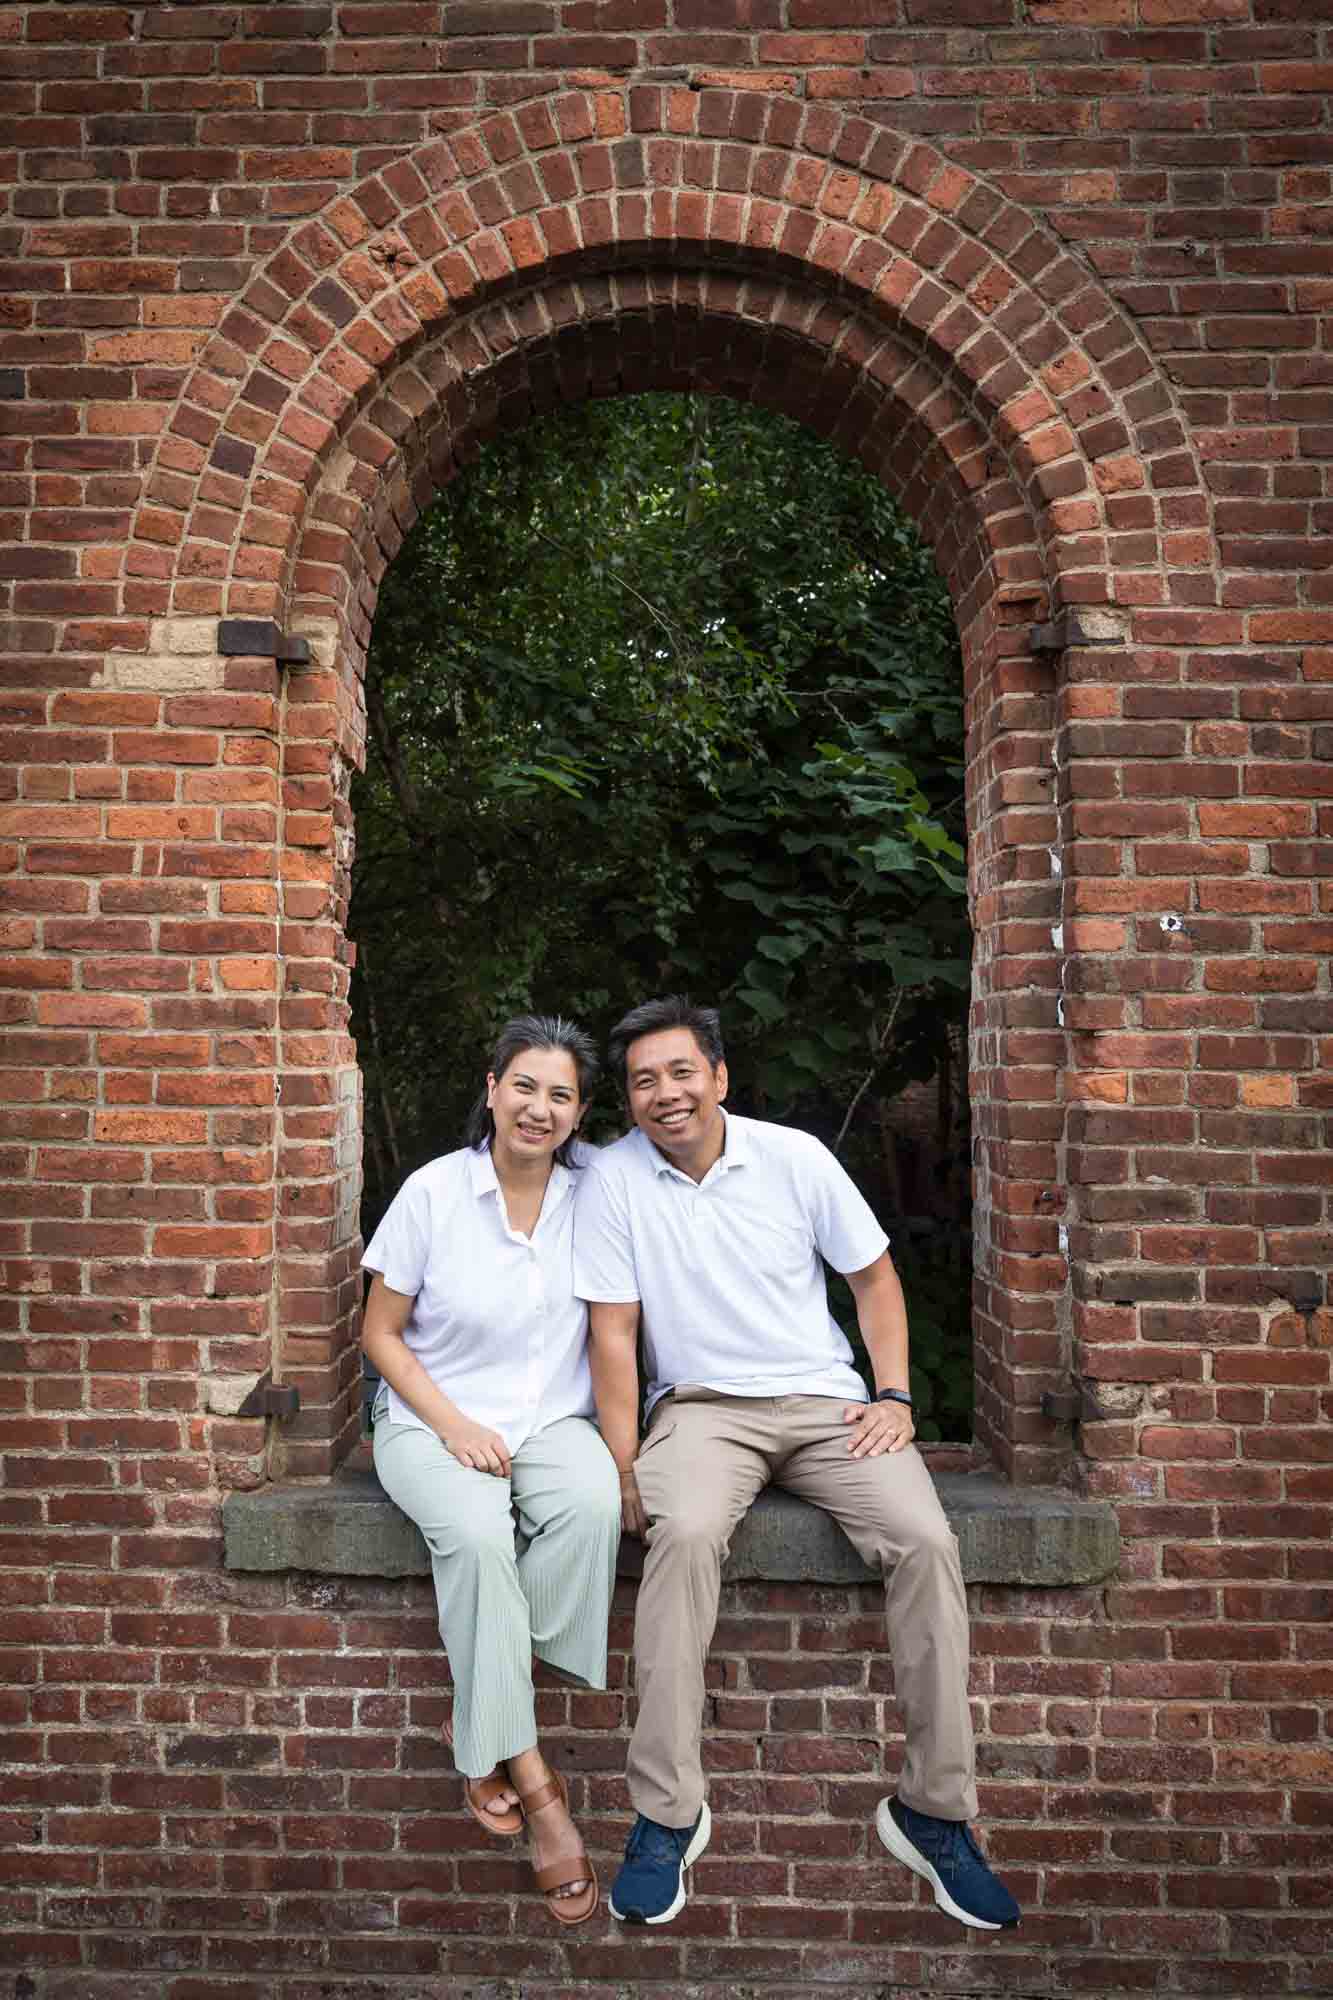 Couple sitting together in brick window of Max's Family Garden for an article on Brooklyn Bridge Park family portrait tips for young children